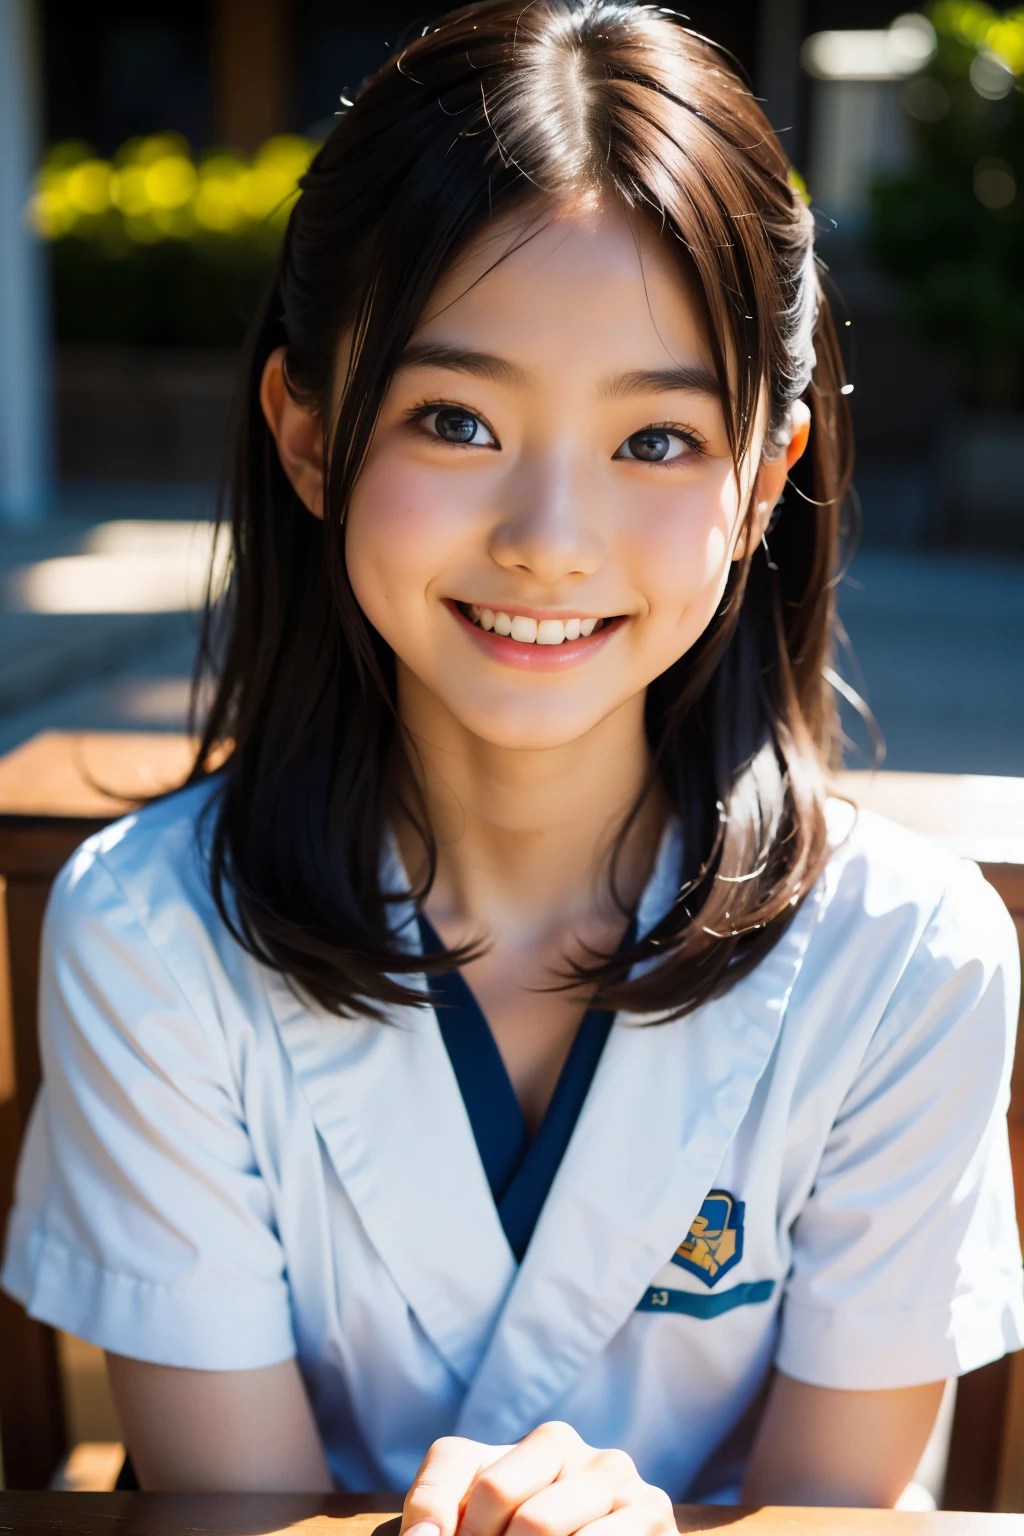 lens: 135mm f1.8, (highest quality),(RAW Photos), (Tabletop:1.1), (Beautiful 4 year old Japanese girl), Cute face, (Deeply chiseled face:0.7), (freckles:0.4), dappled sunlight, Dramatic lighting, (Japanese School Uniform), (On campus), shy, (Close-up shot:1.2), (smile),, (Sparkling eyes)、(sunlight)